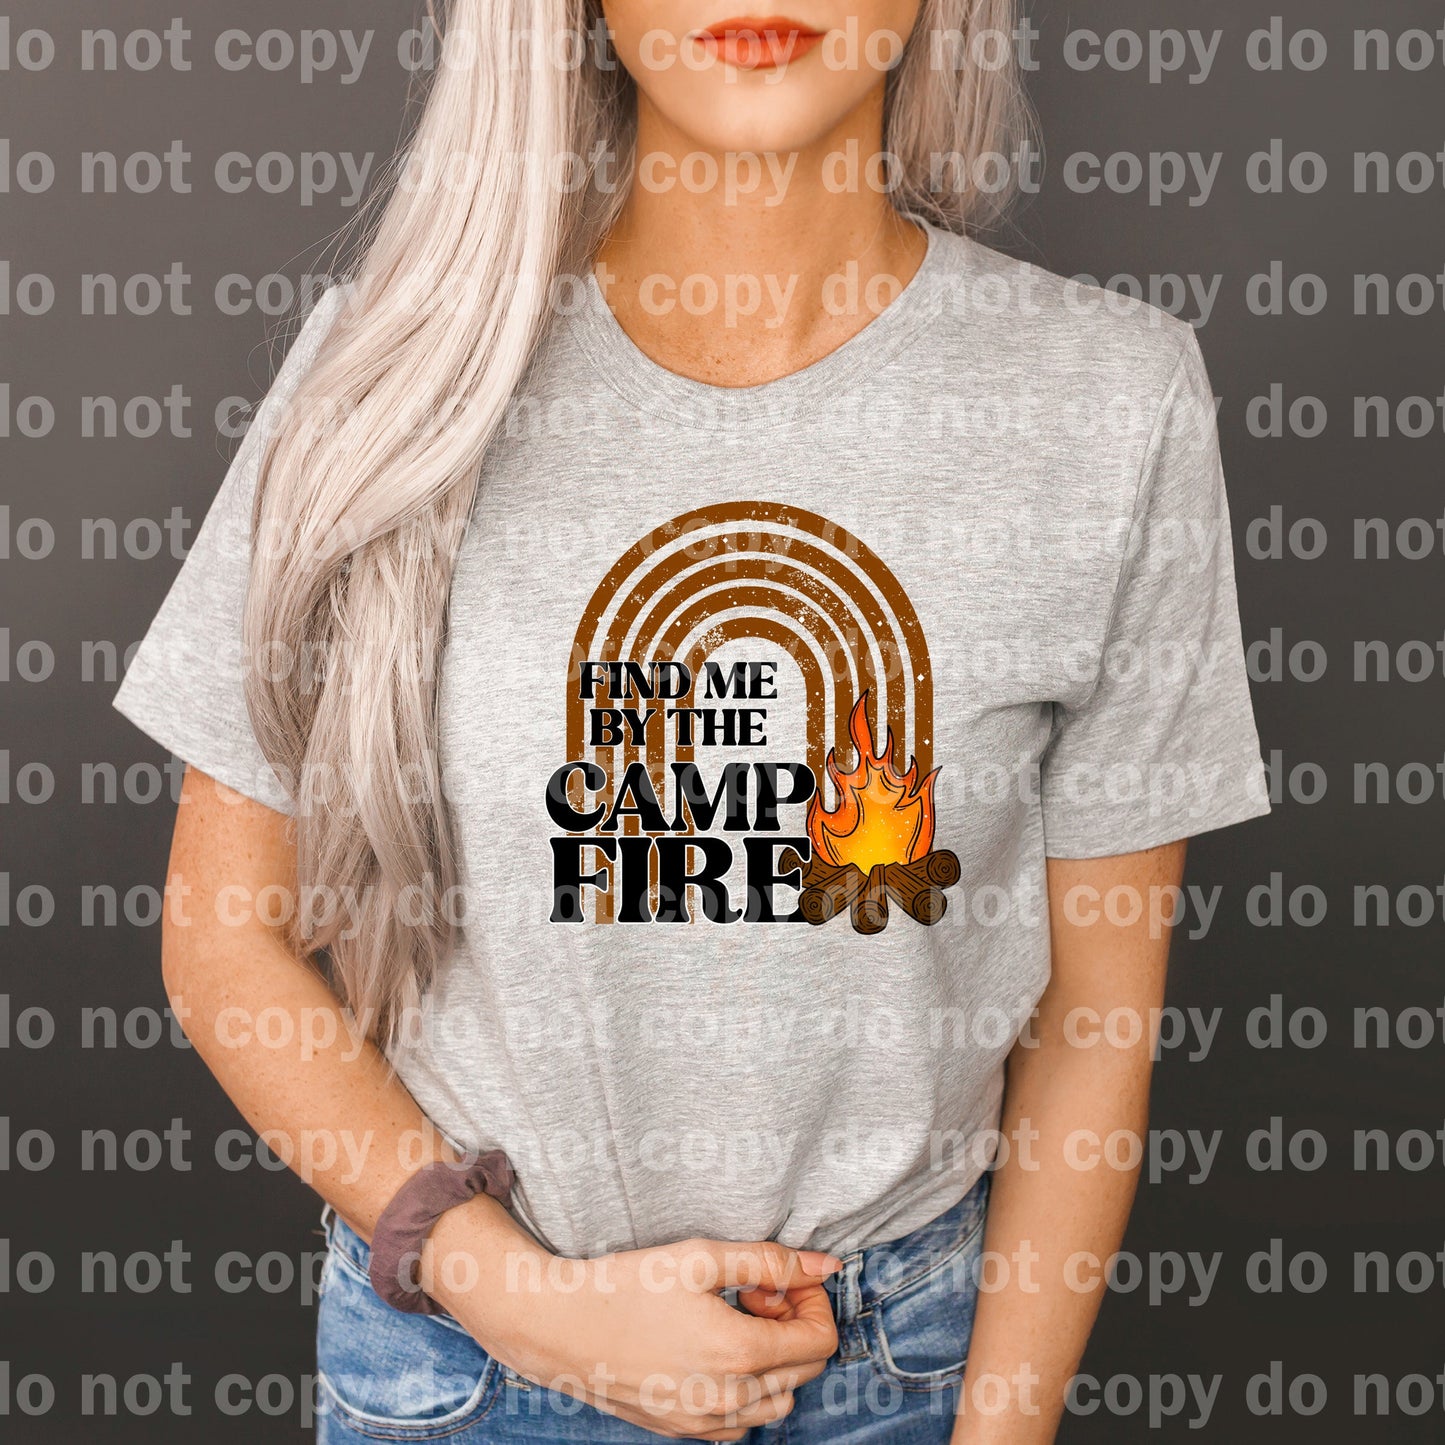 Find Me By The Campfire Dream Print or Sublimation Print